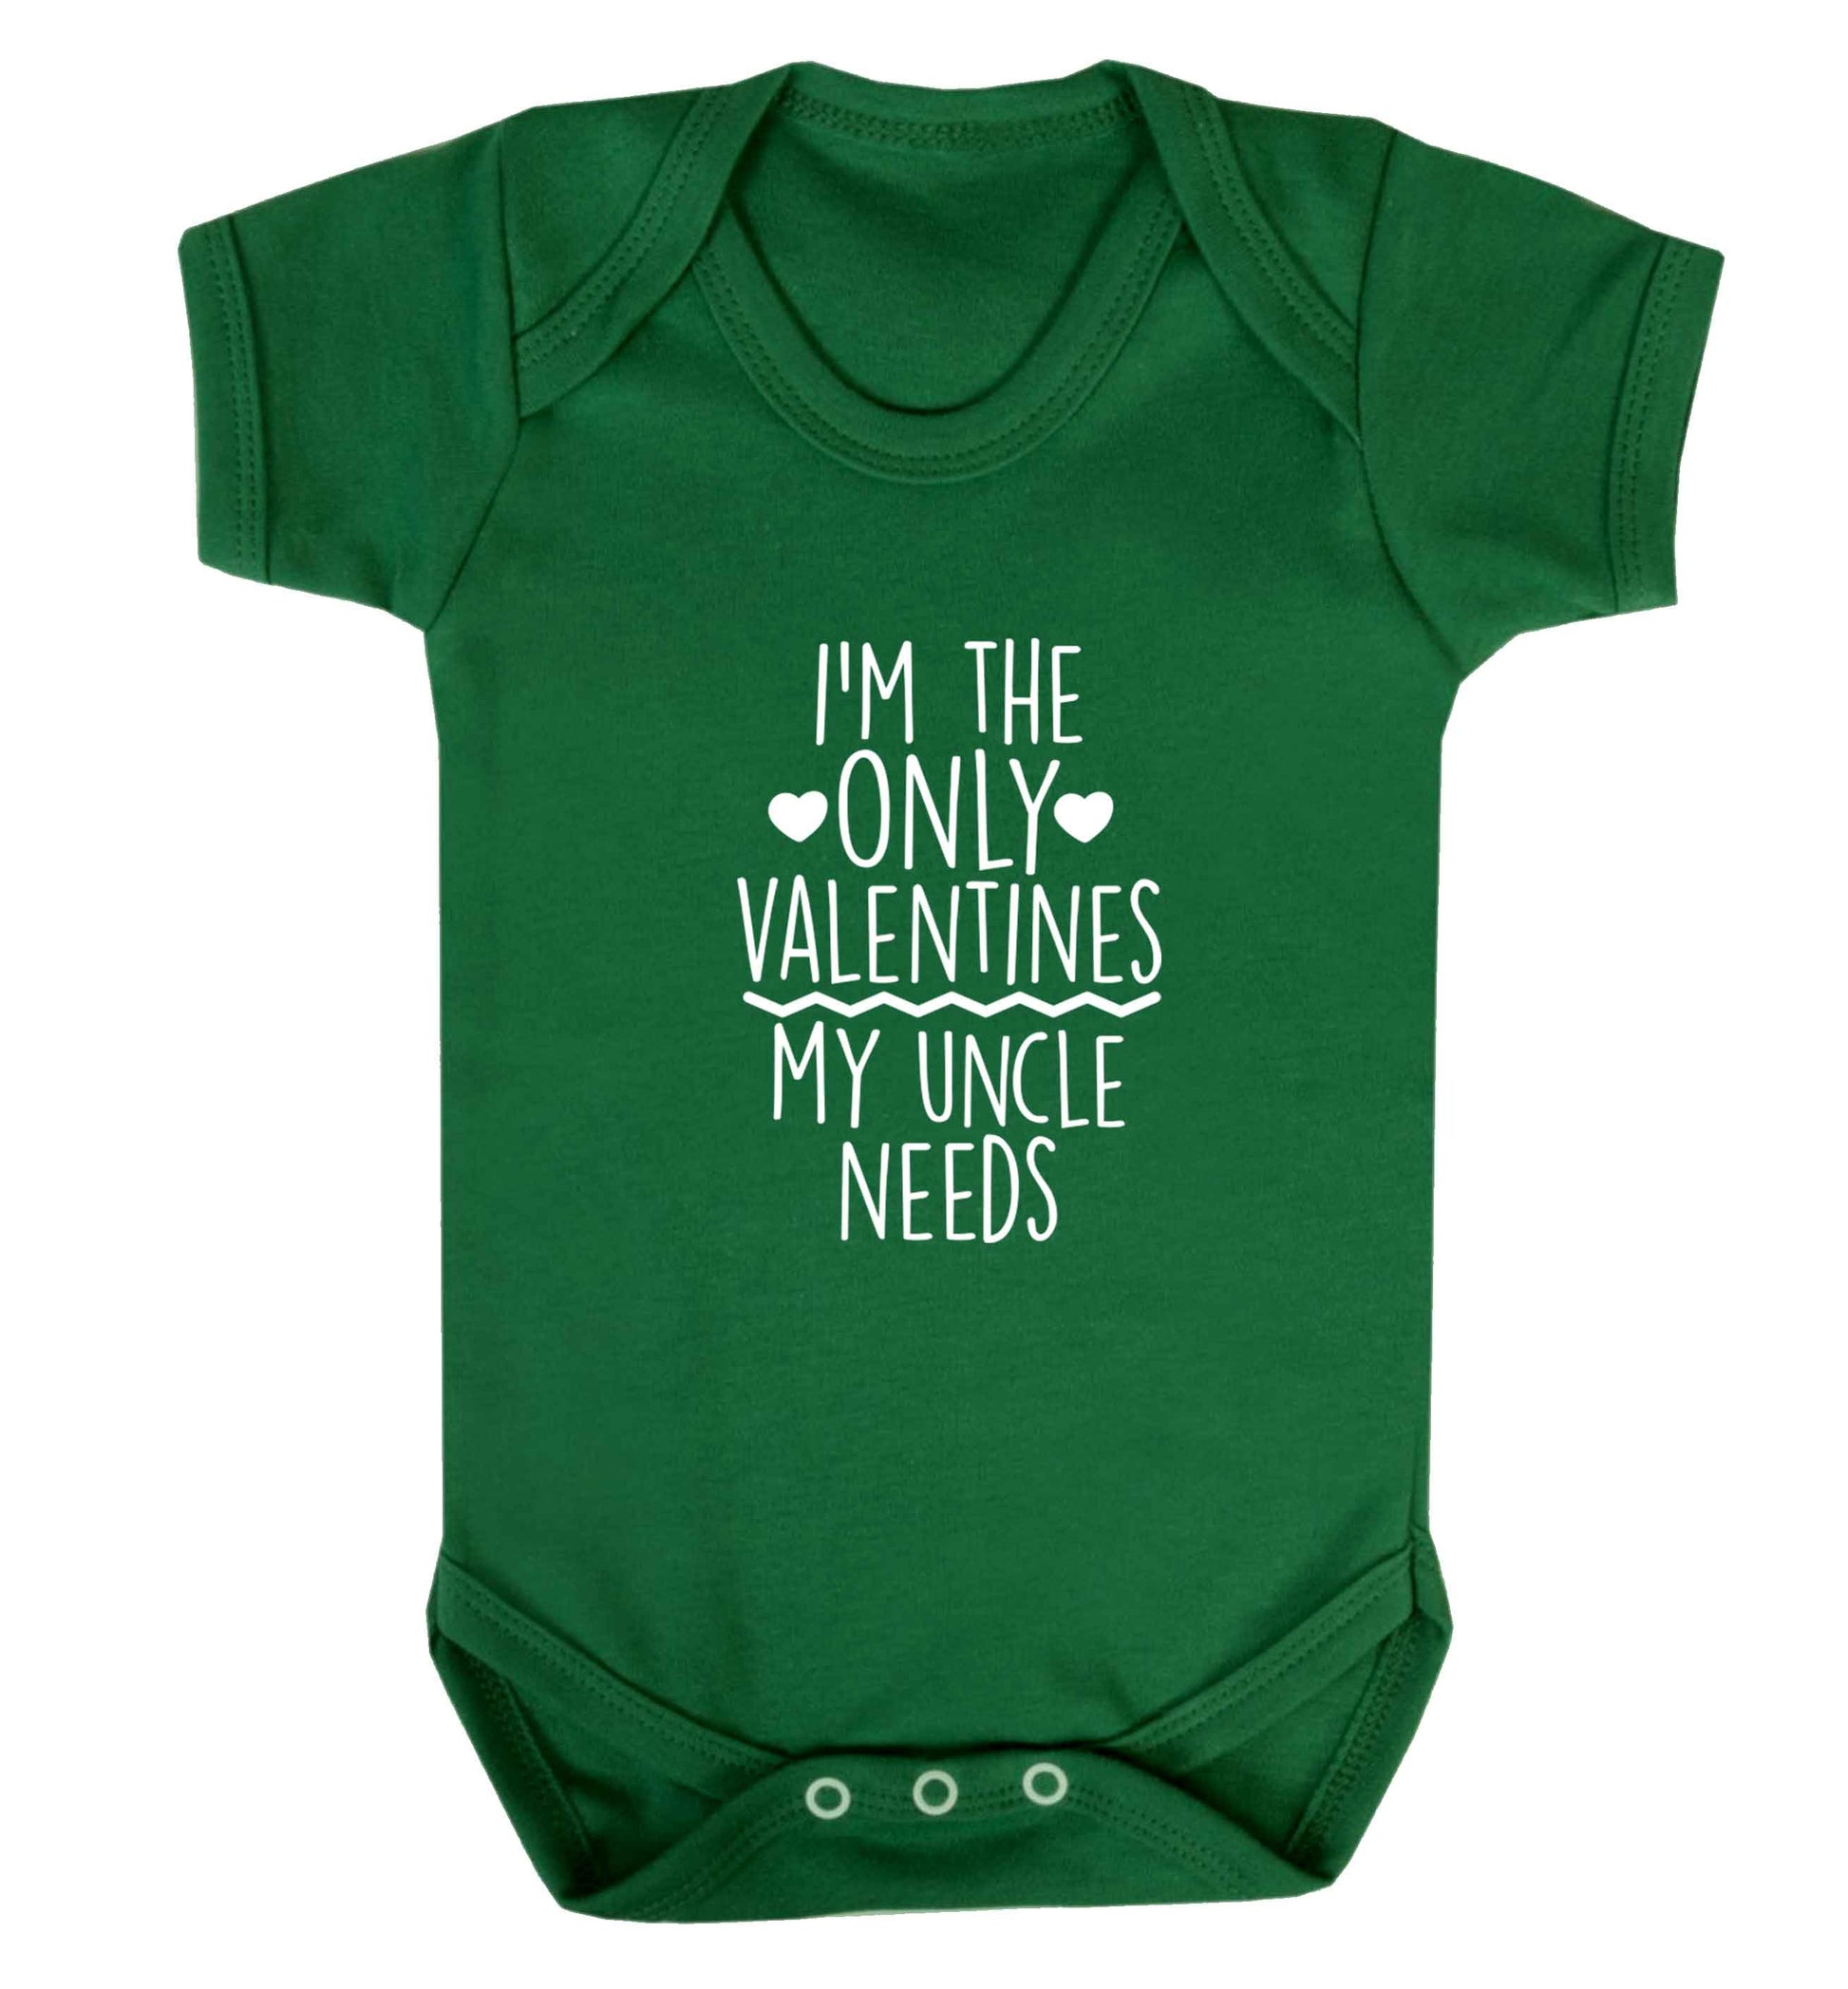 I'm the only valentines my uncle needs baby vest green 18-24 months